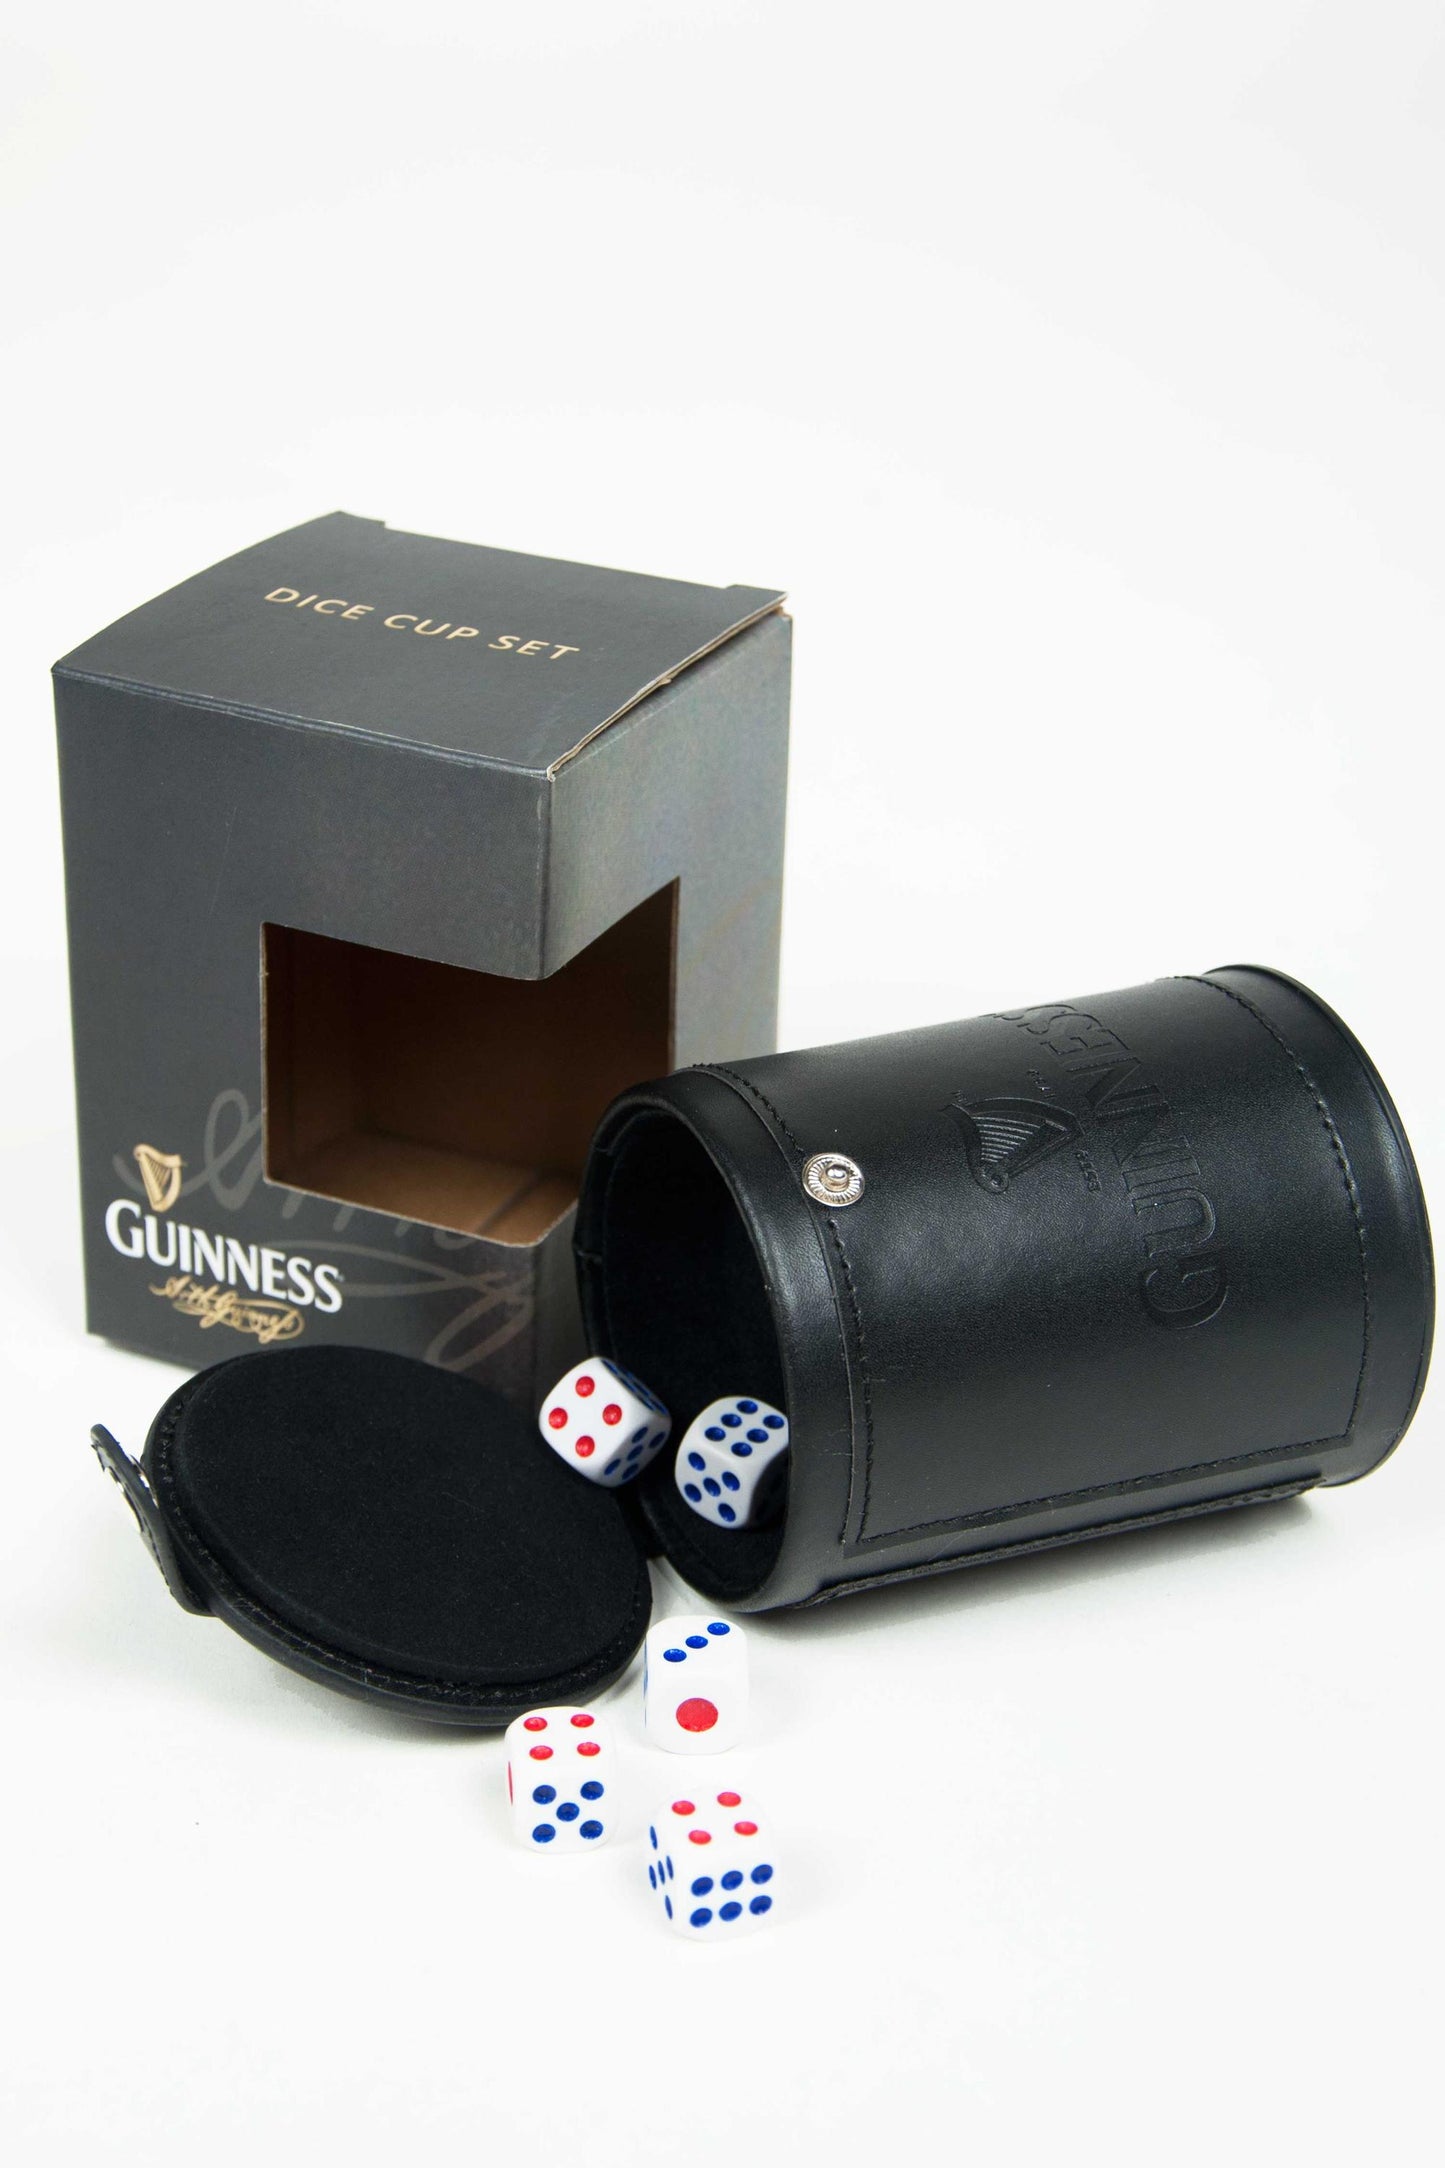 Get ready for game night with this Guinness® Dice Cup Set. The set includes a pair of dice and a stylish box to store them in. Perfect for any fan of Guinness!